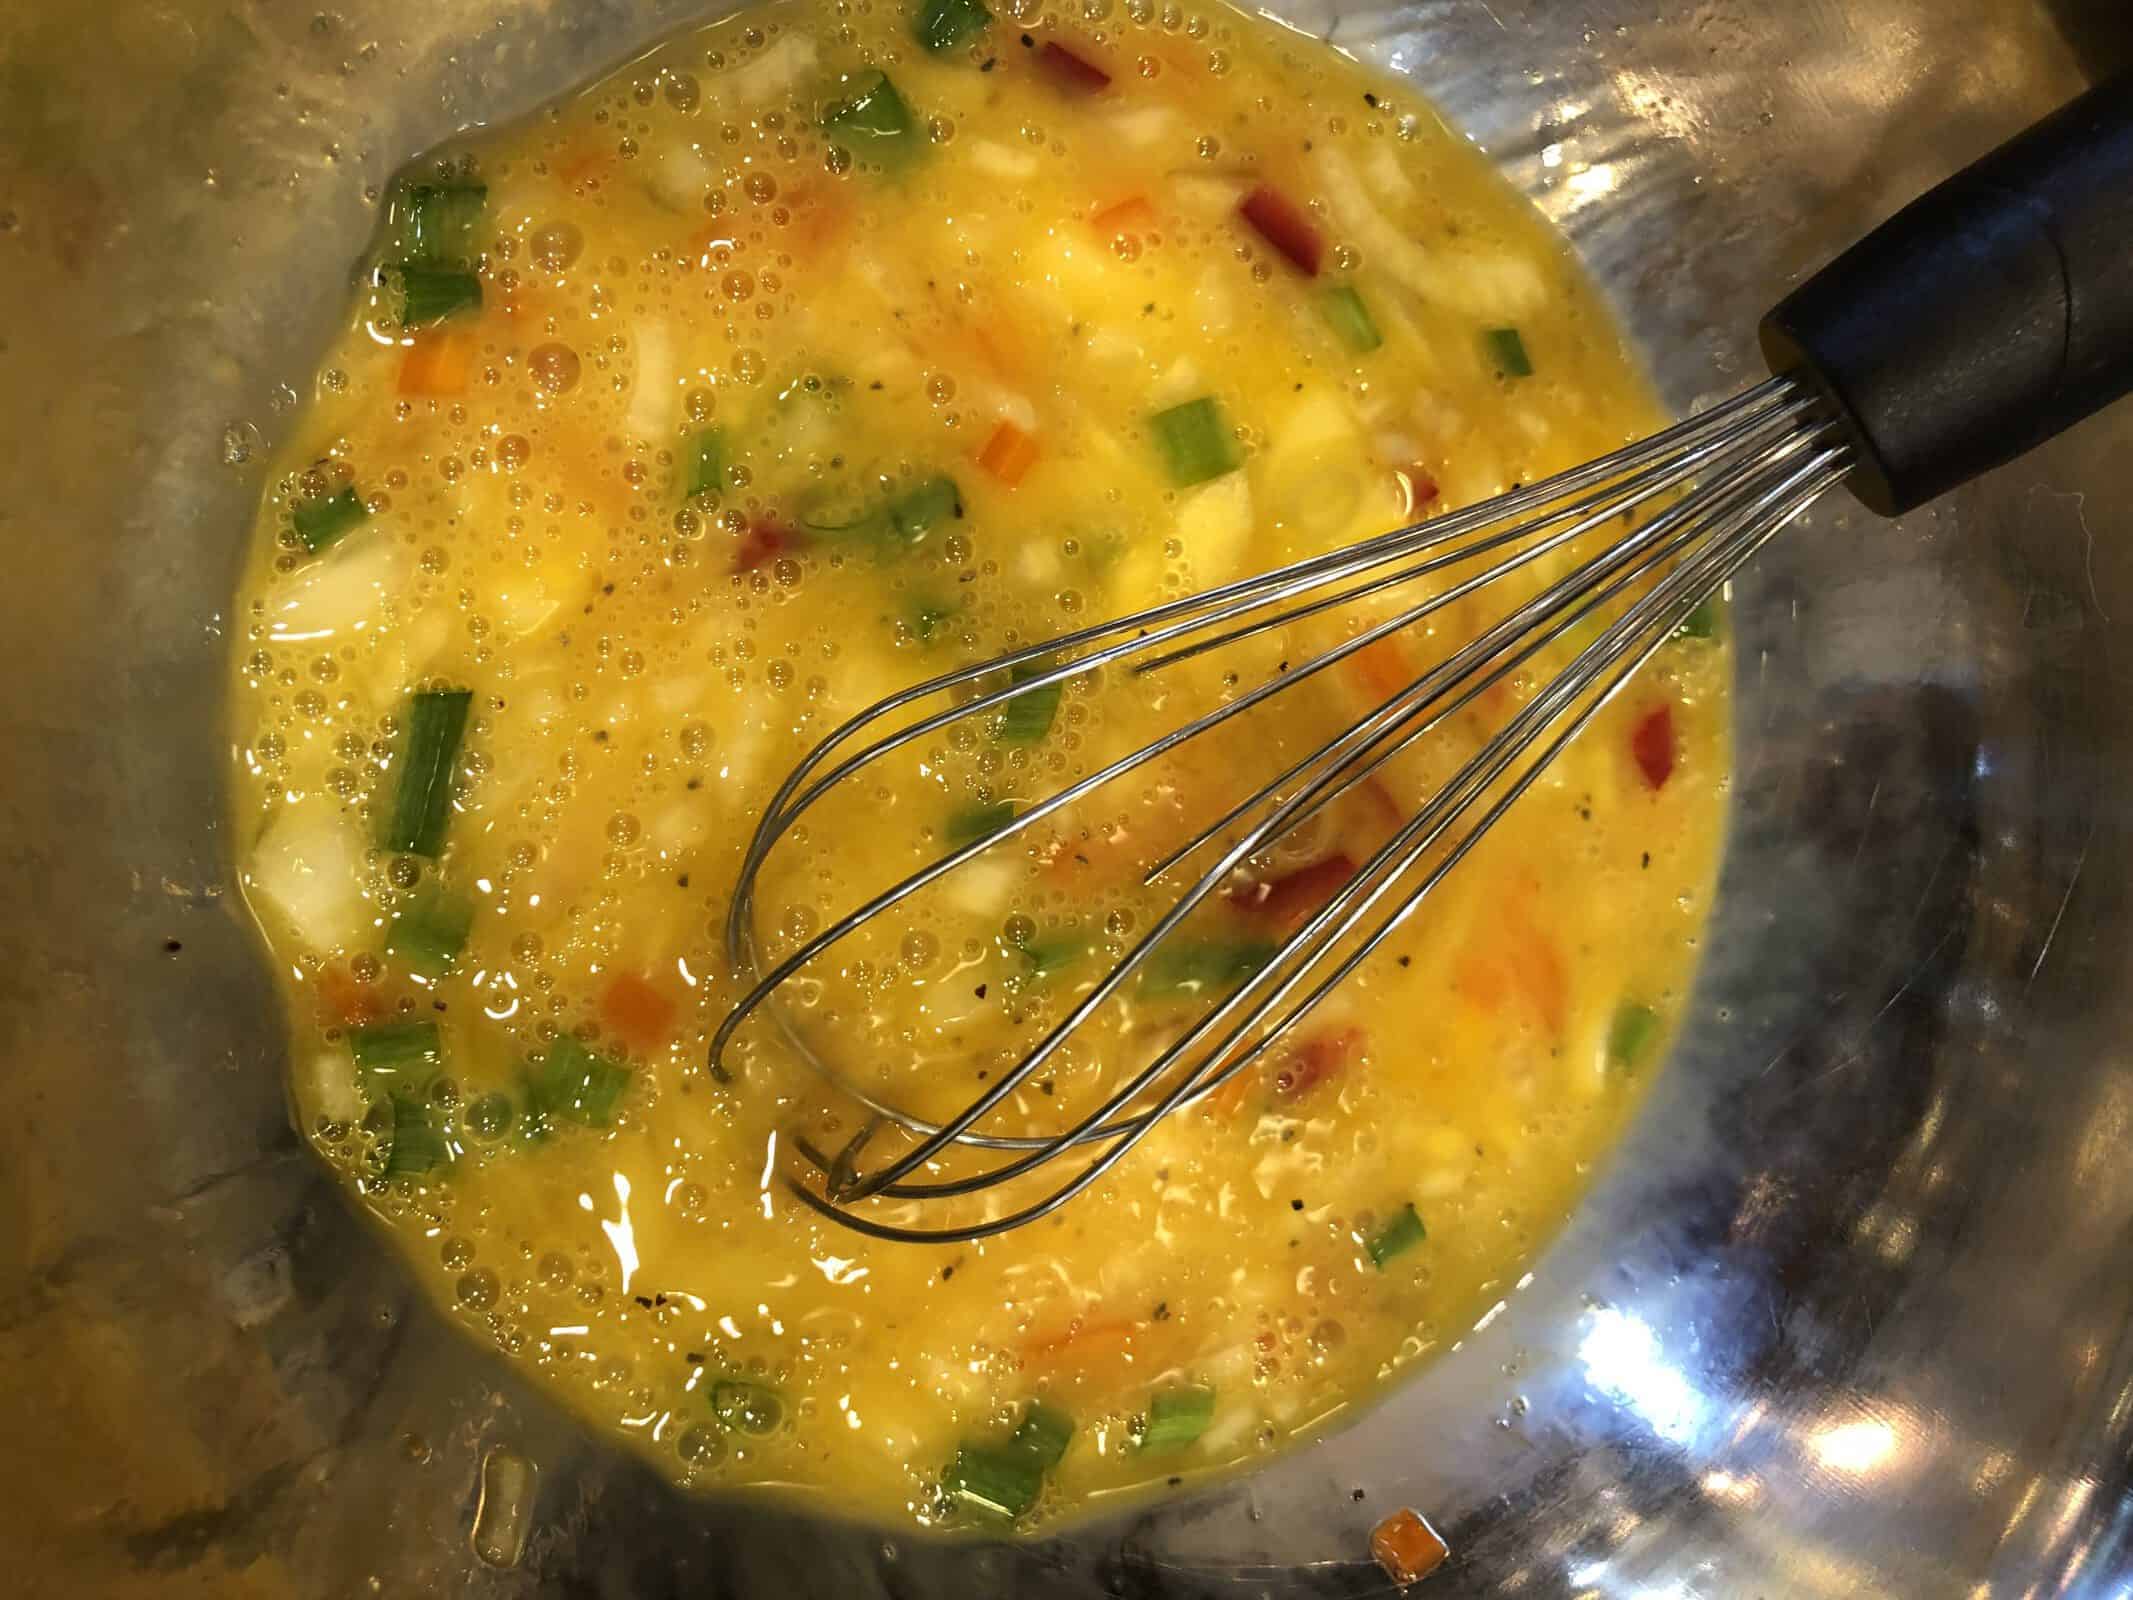 A whisk Beating the egg mixture in a stainless steel bowl